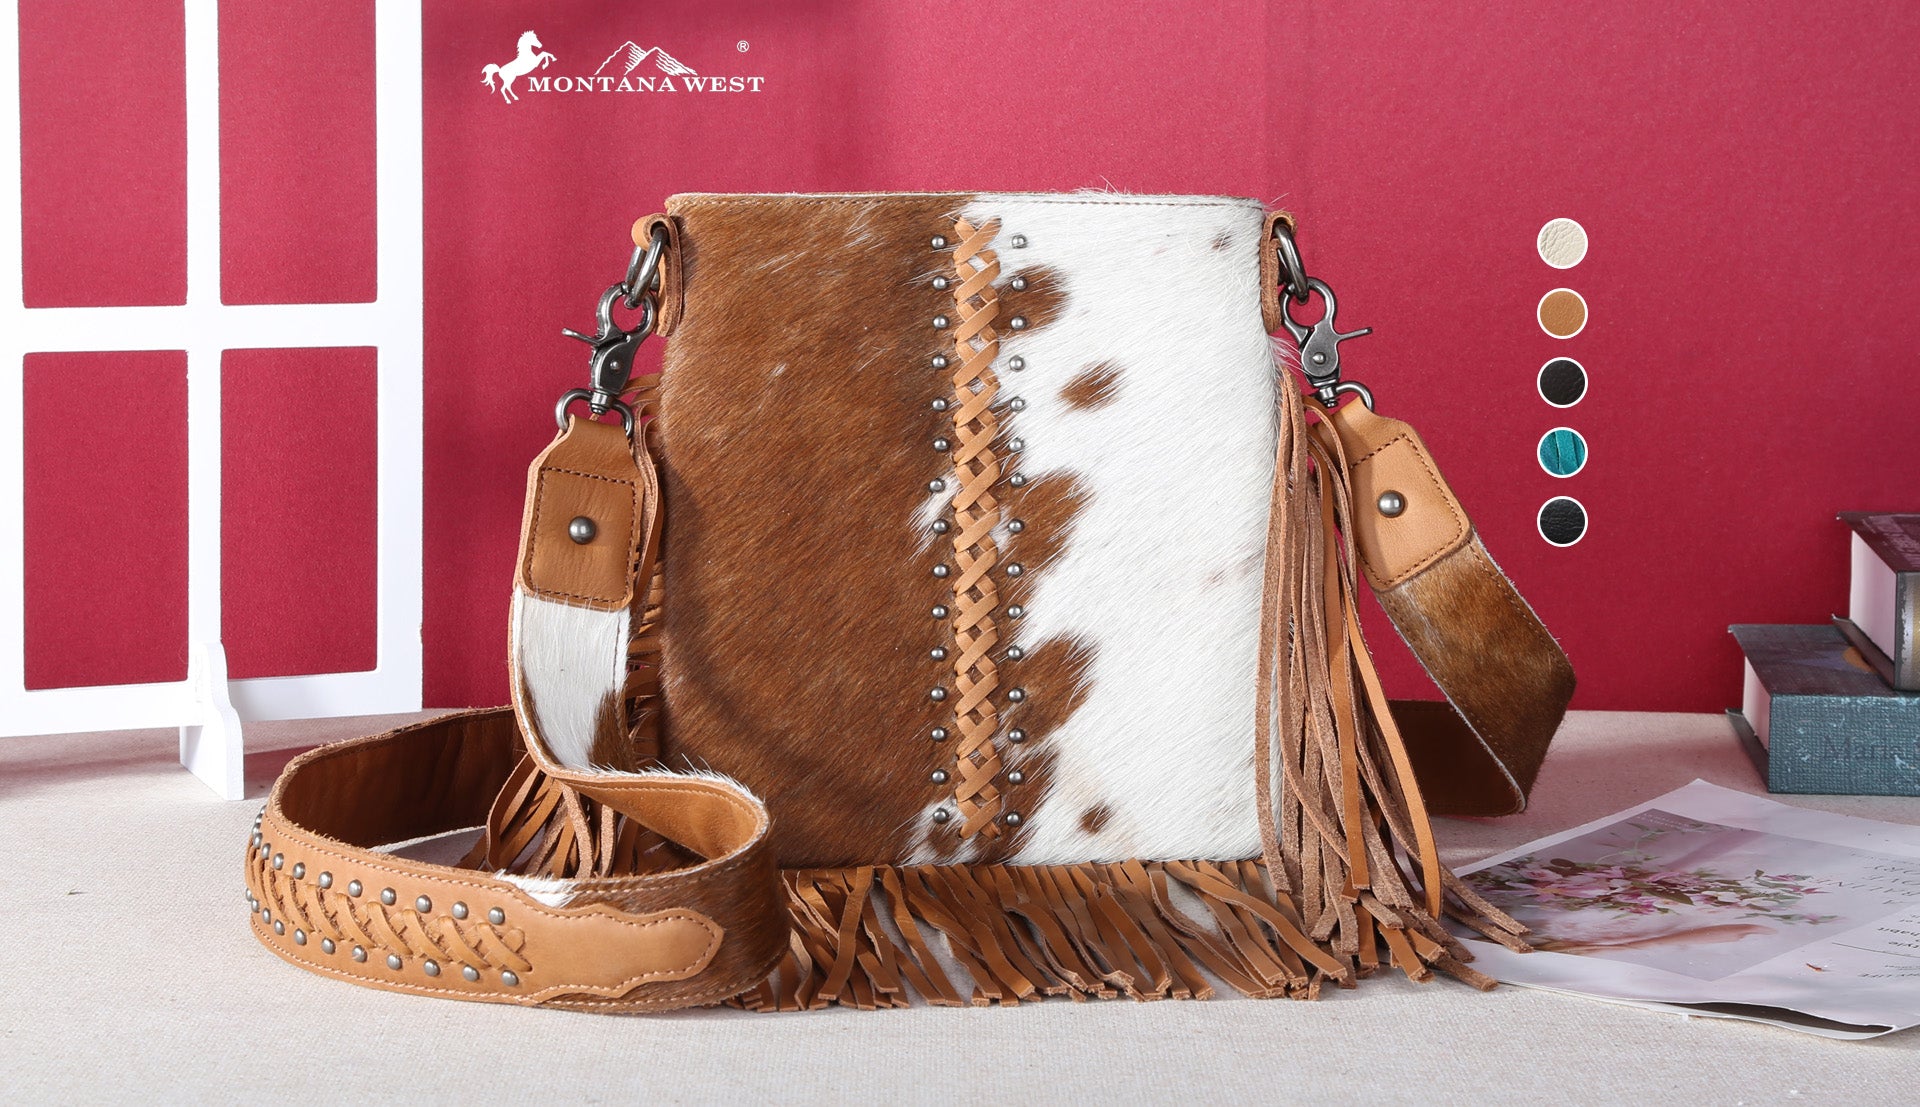 Western Leather Crossbody Bag With Leather Fringe, Aztec Cowhide Bag Purse  Tote Country Western Southern Cowhide Western Gift Hobo Bag - Etsy